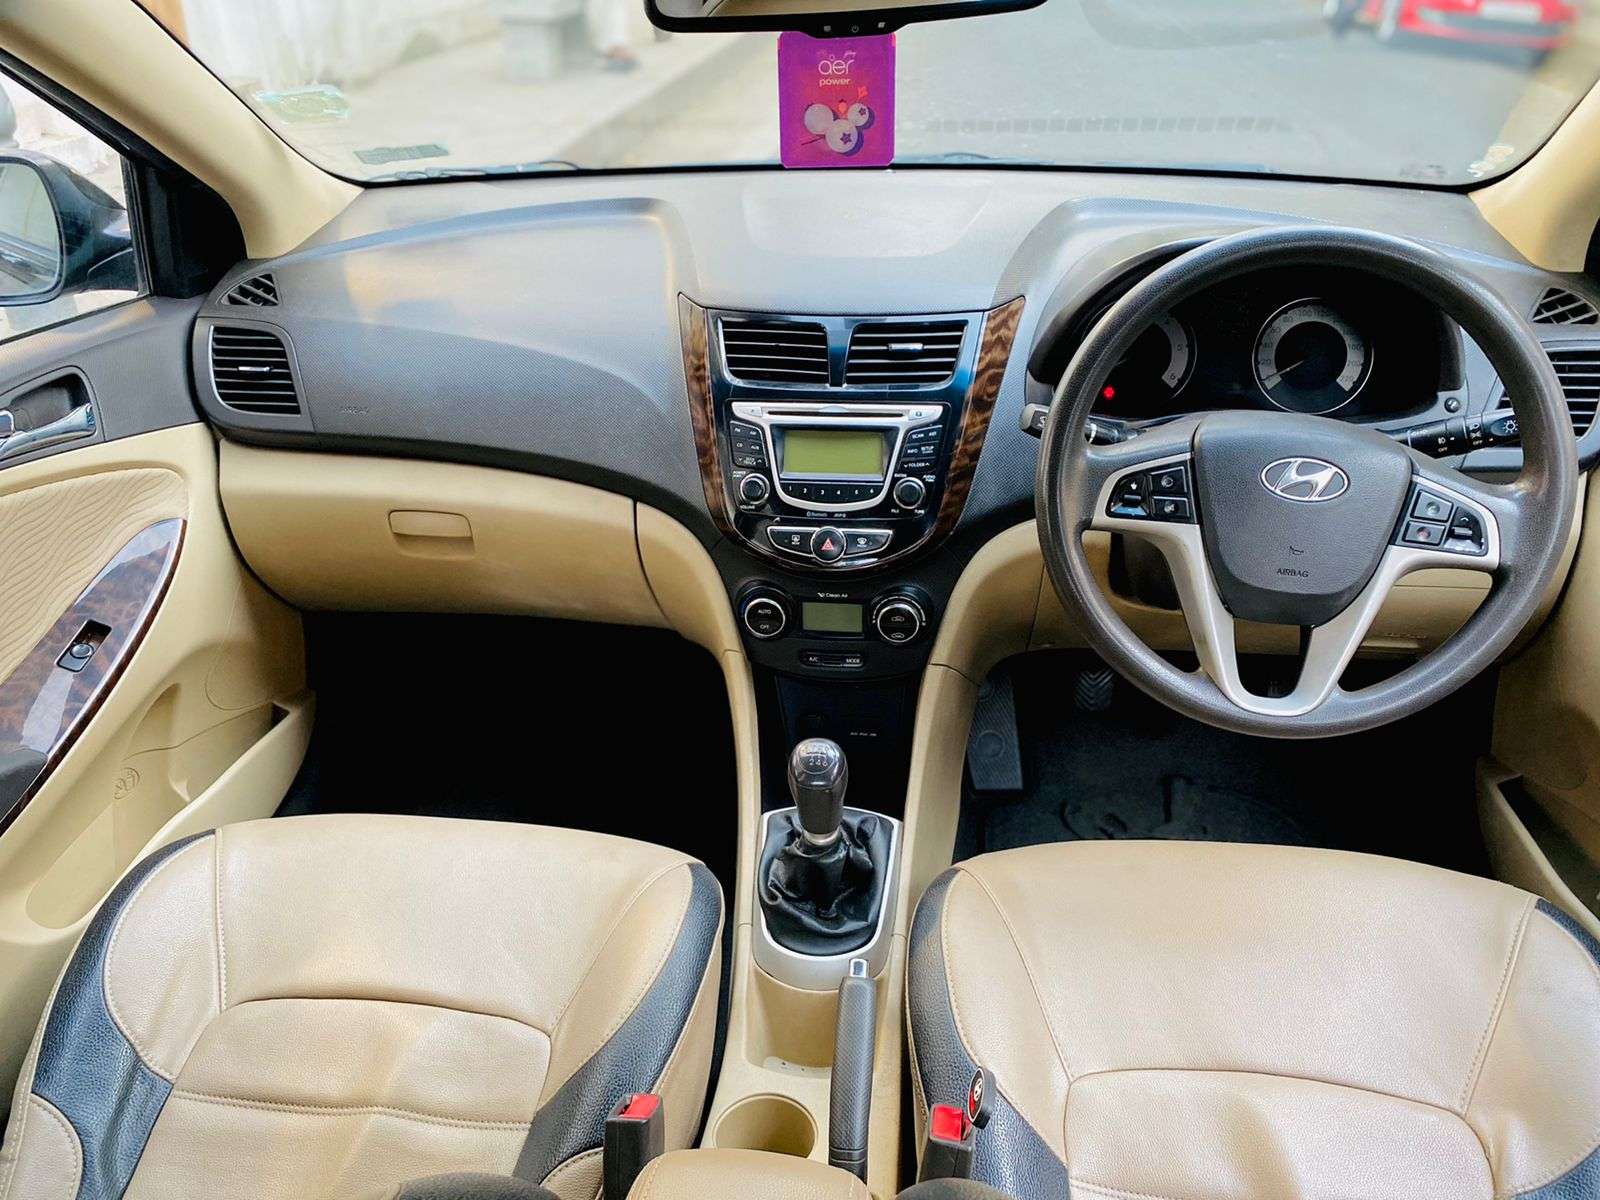 1514-for-sale-Hyundai-Verna-Fluidic-Diesel-First-Owner-2013-PY-registered-rs-485000